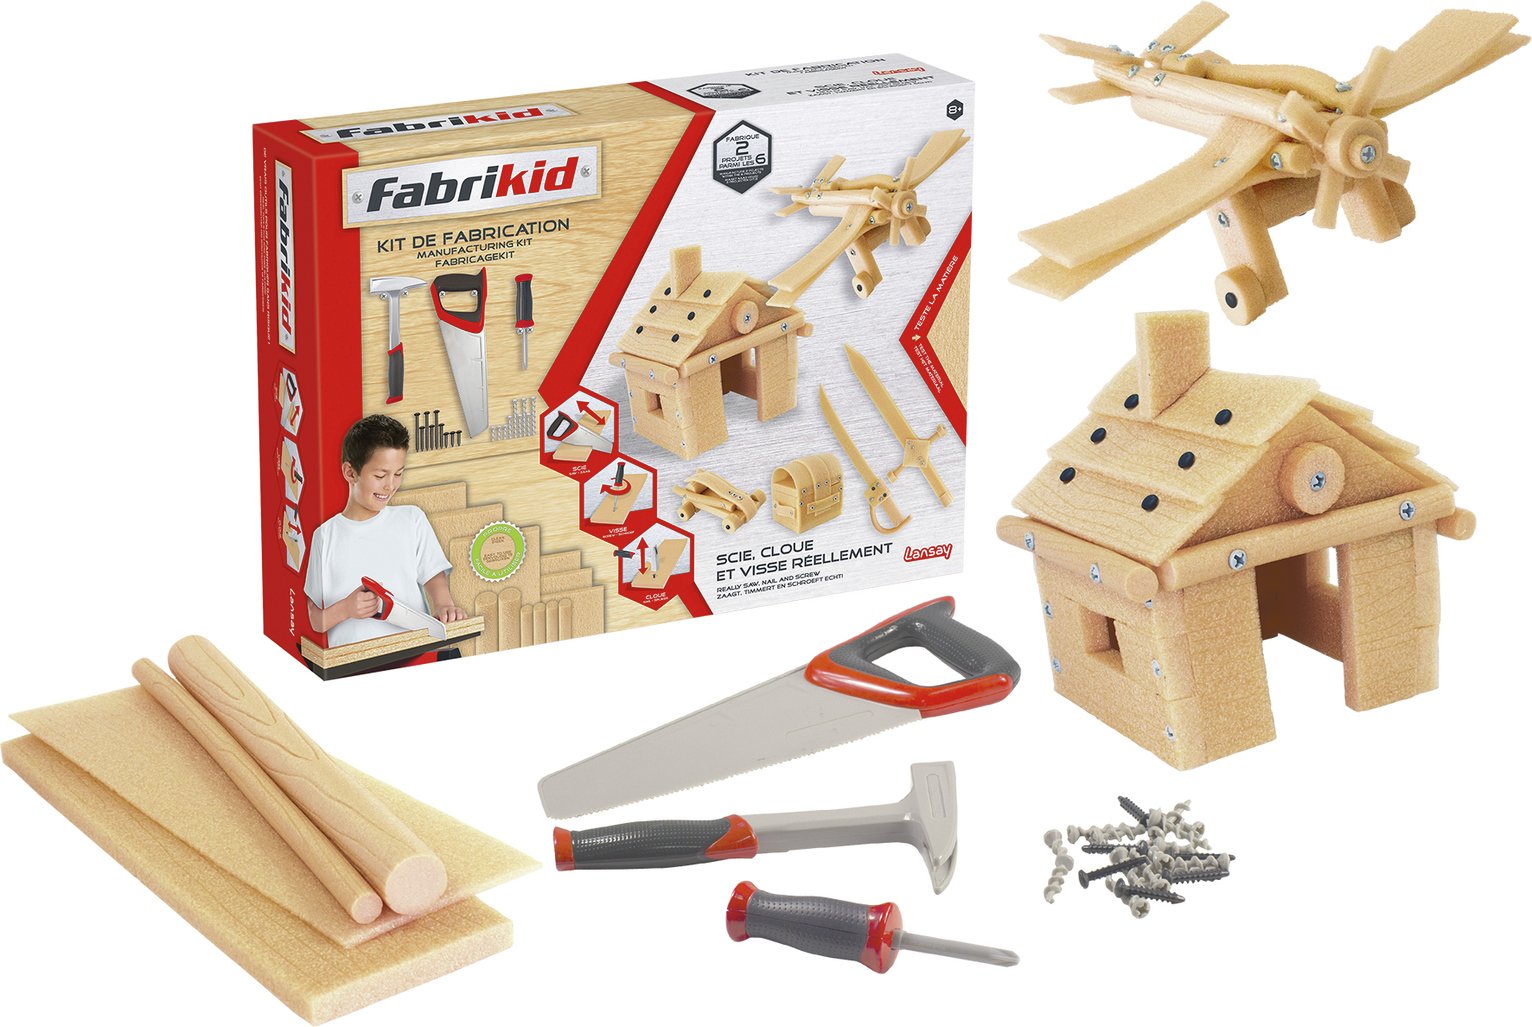 Fabrikid Construction Kit Review